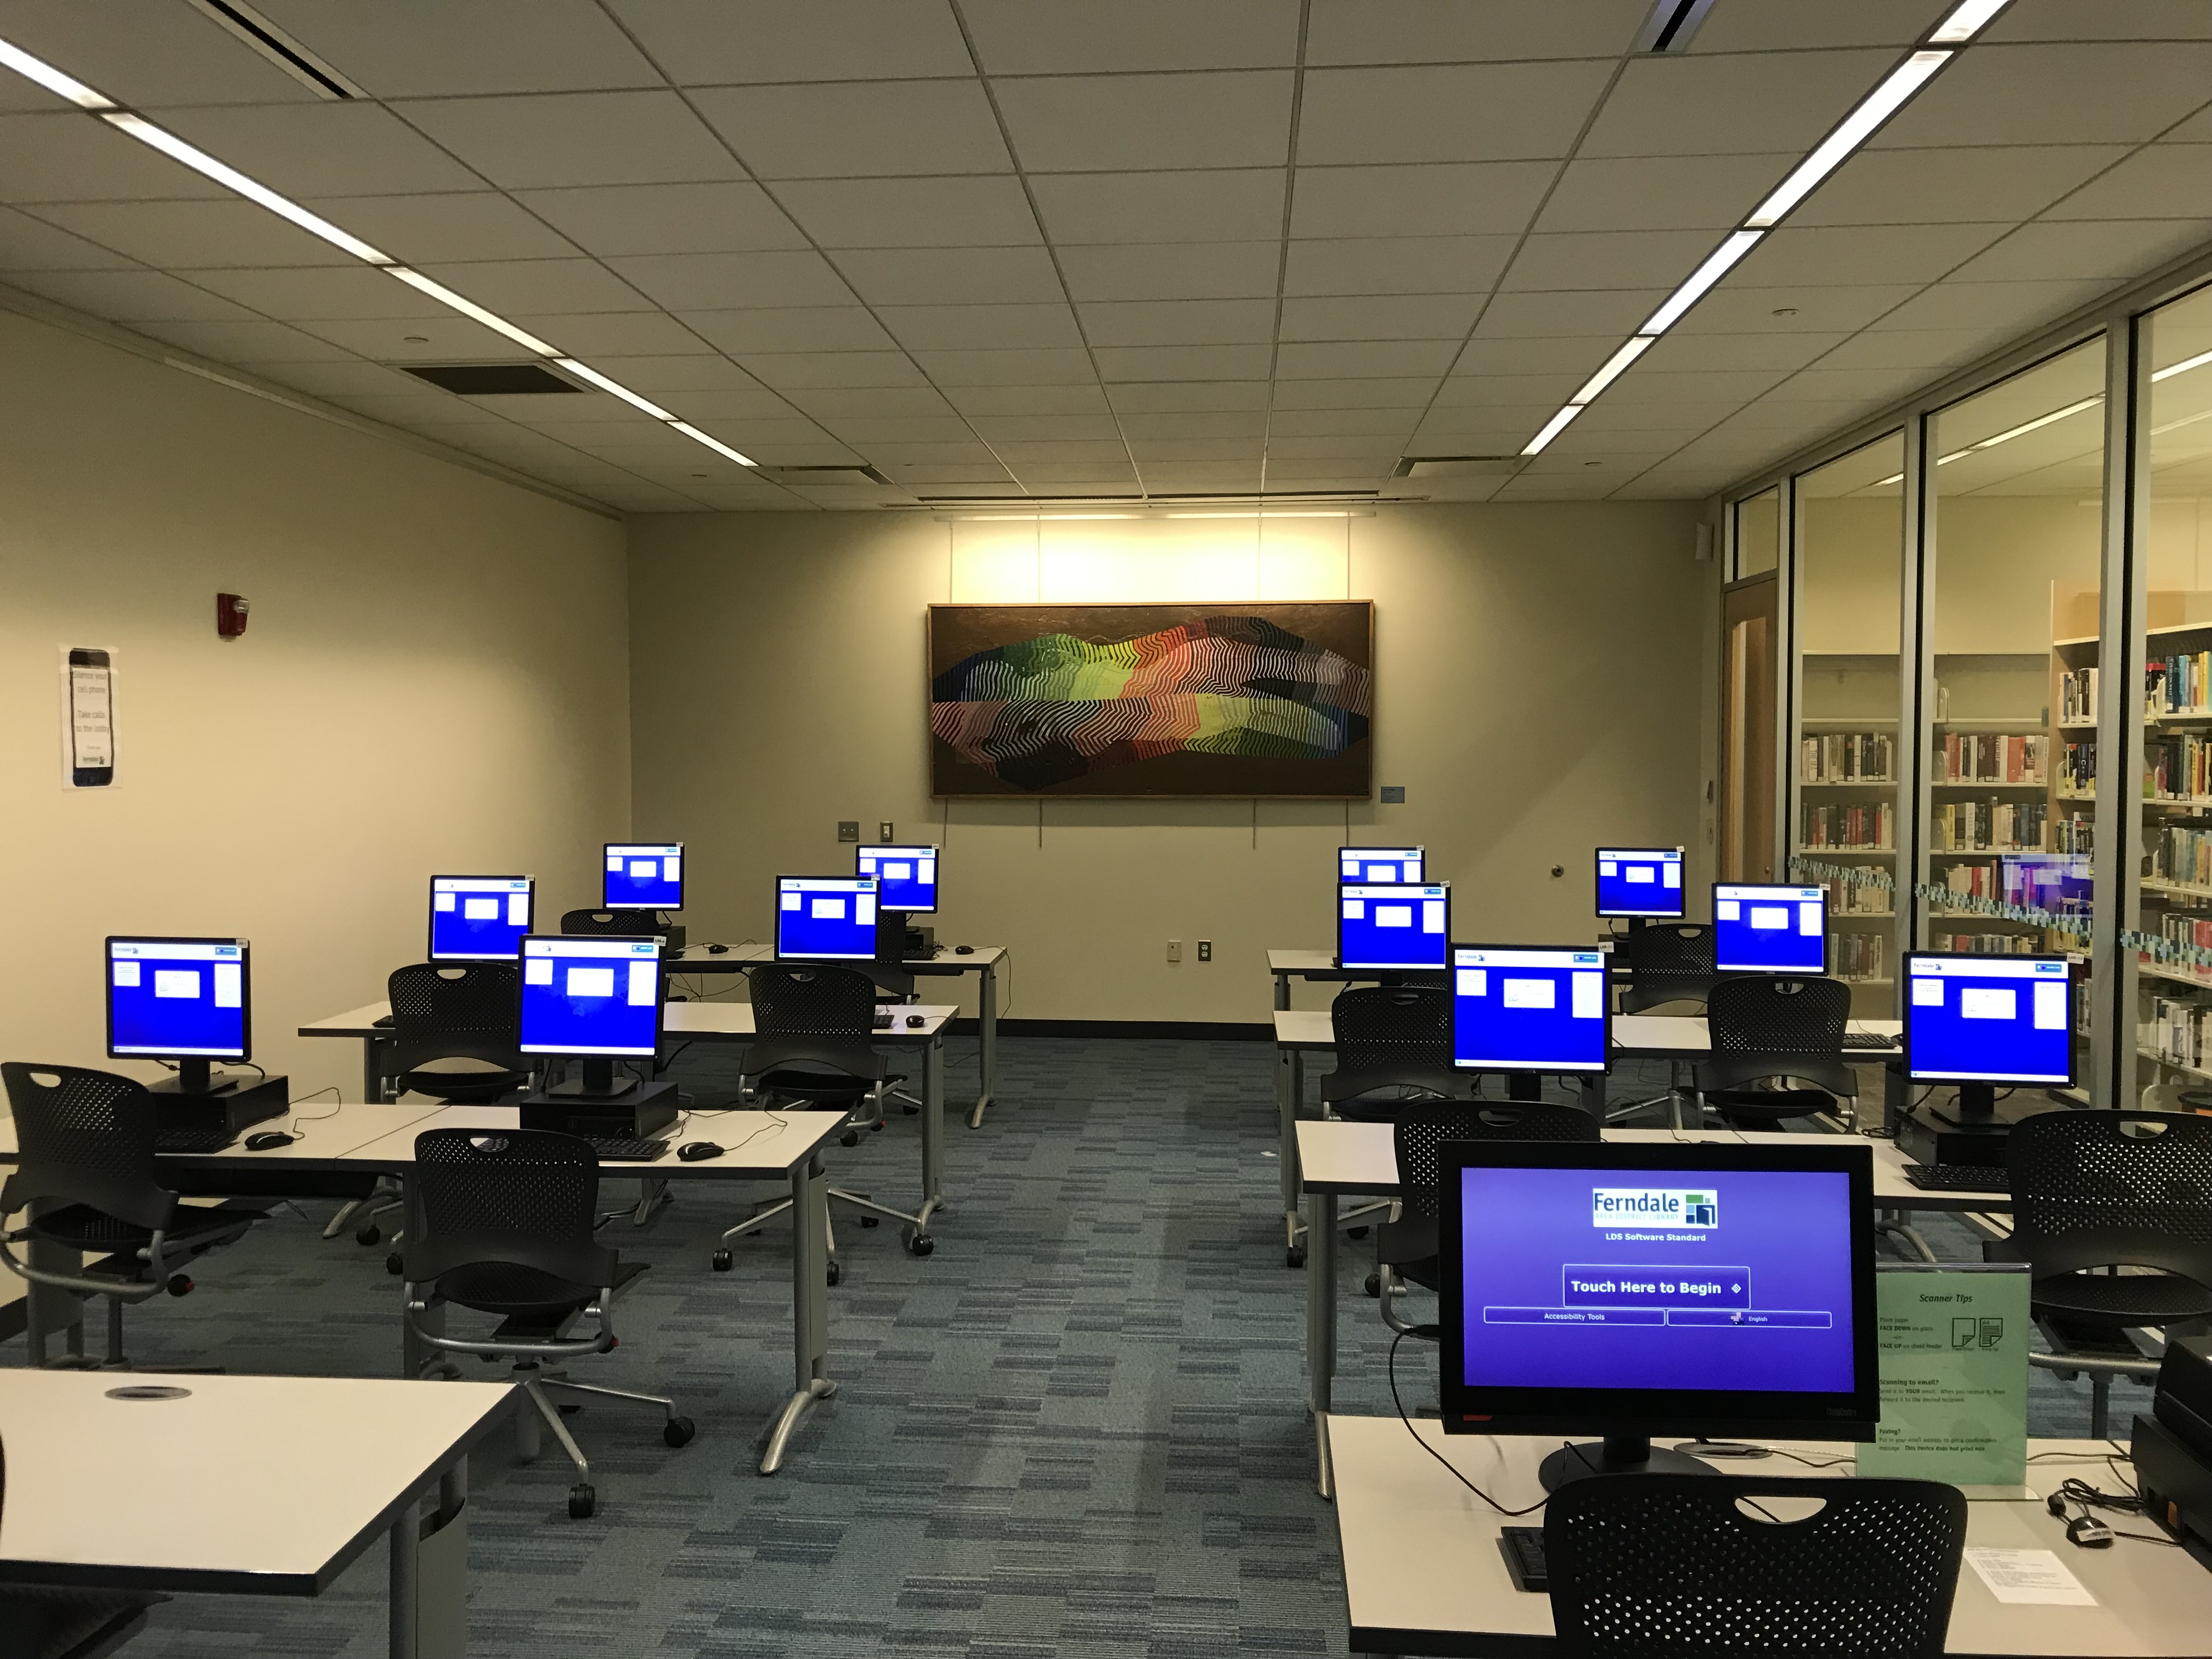 image of the library's computer lab